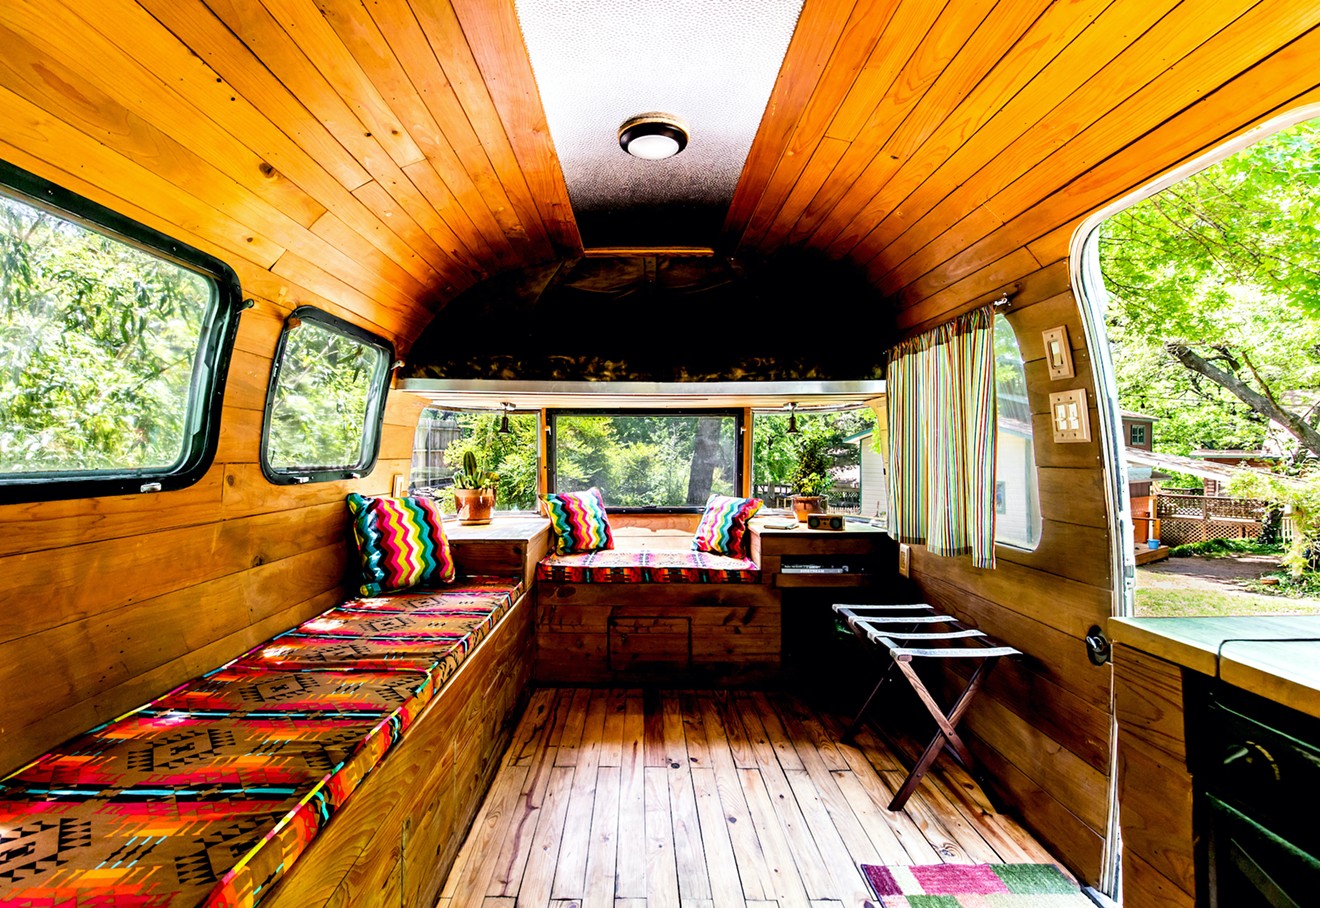 The cool Kid's airstream